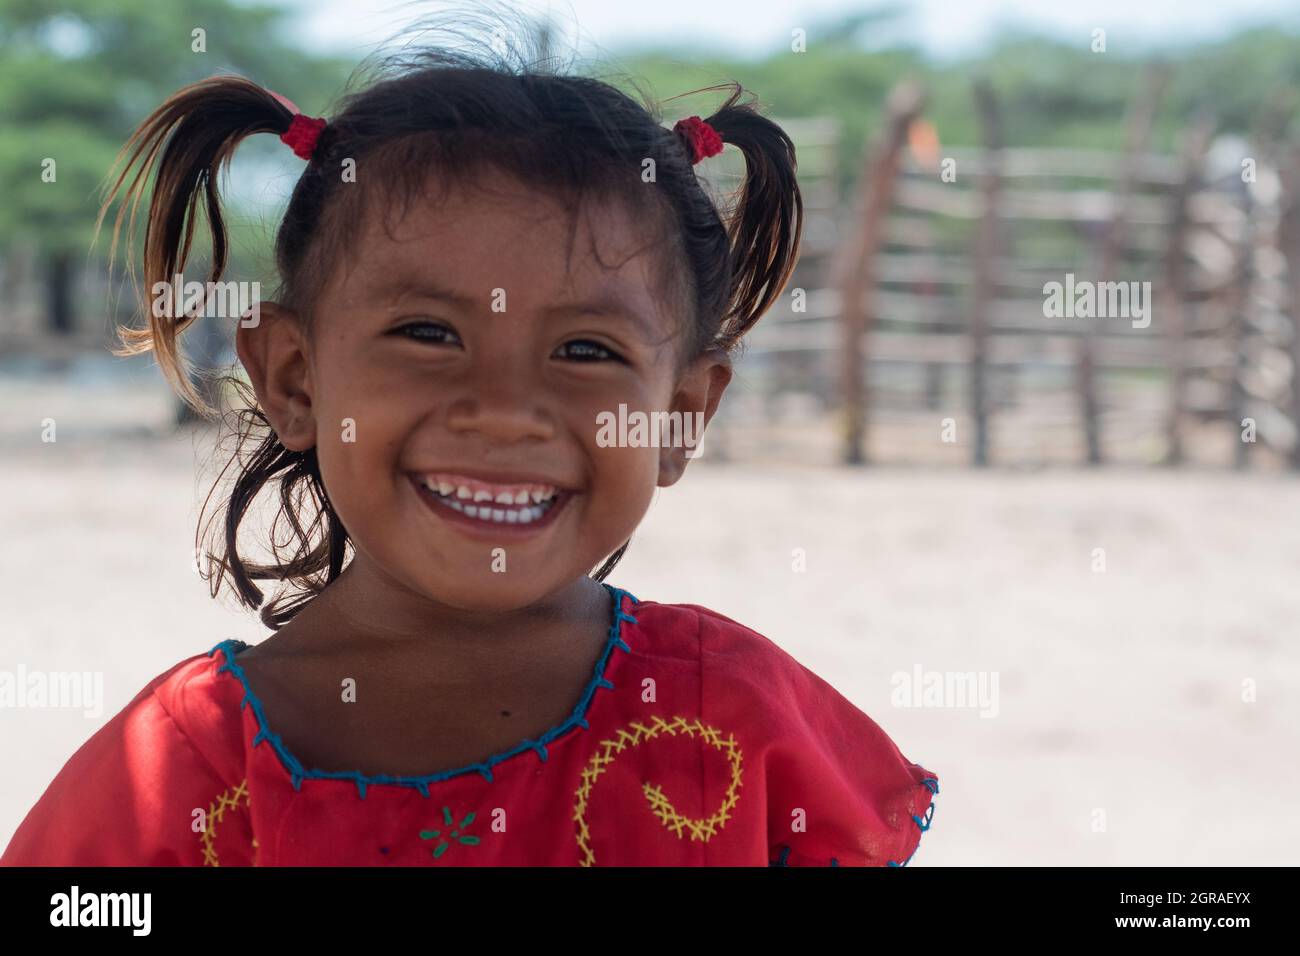 Mayapo, Colombia. 26th Sep, 2021. A child poses for a portrait during a Humanitarian Mission developed by 'De Corazon Guajira' in Mayapo at La Guajira - Colombia were they visited the Wayuu indigenous communities 'Pactalia, Poromana, Perrohuila' on September 26, 2021. The Guajira region in Colombia is the poorest region in Colombia, with its people commongly living without drinkable water, electricity and food. Credit: Long Visual Press/Alamy Live News Stock Photo